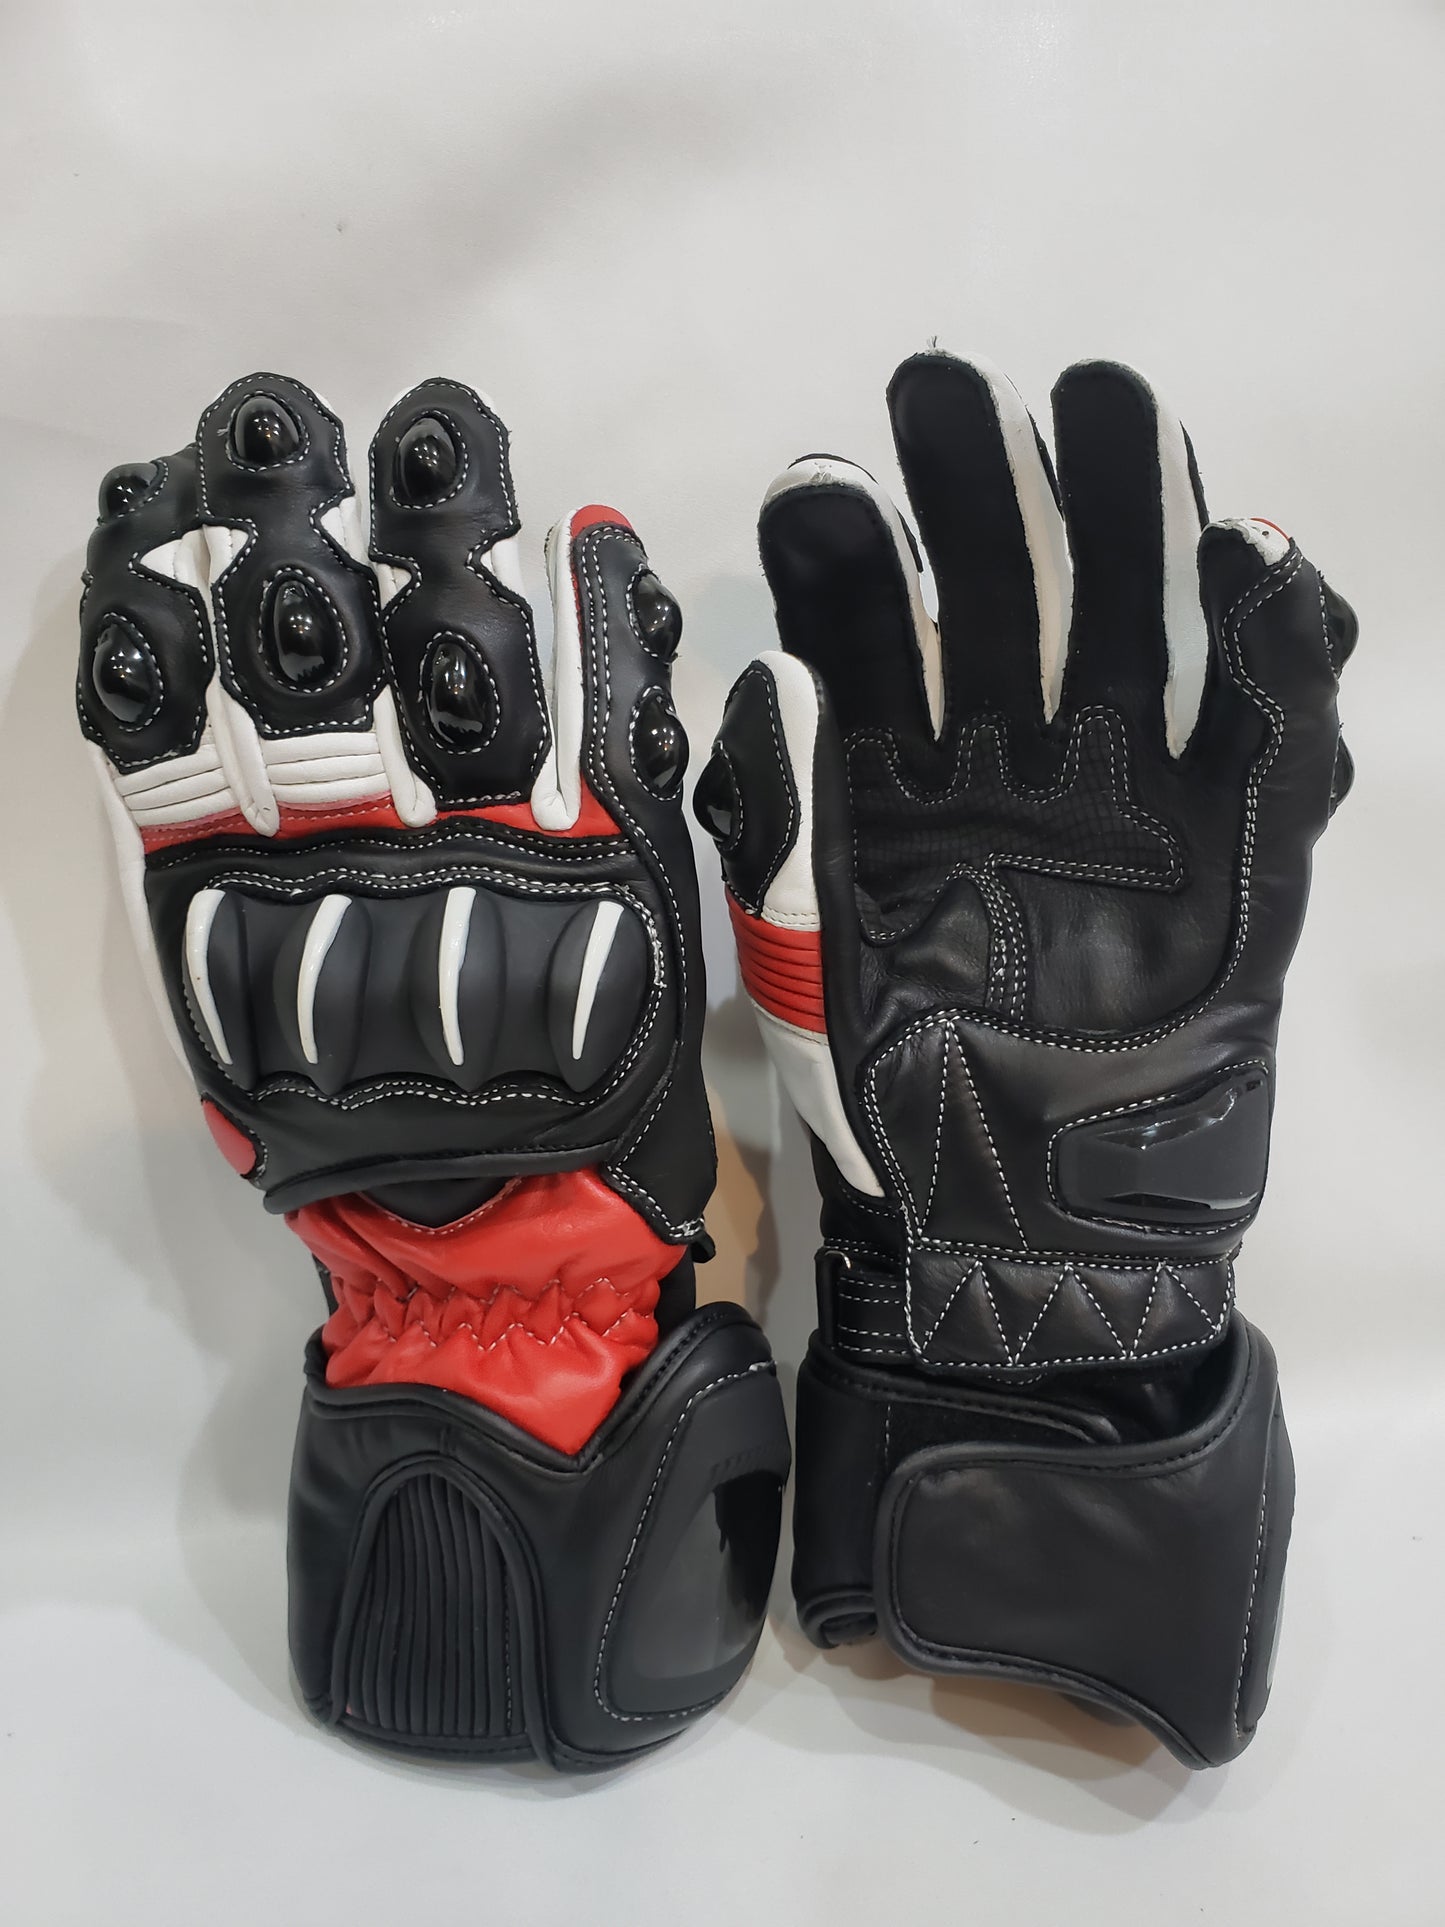 Customize Leather Cowhide Motorcycle Gloves-Men & Women Red/Black/White